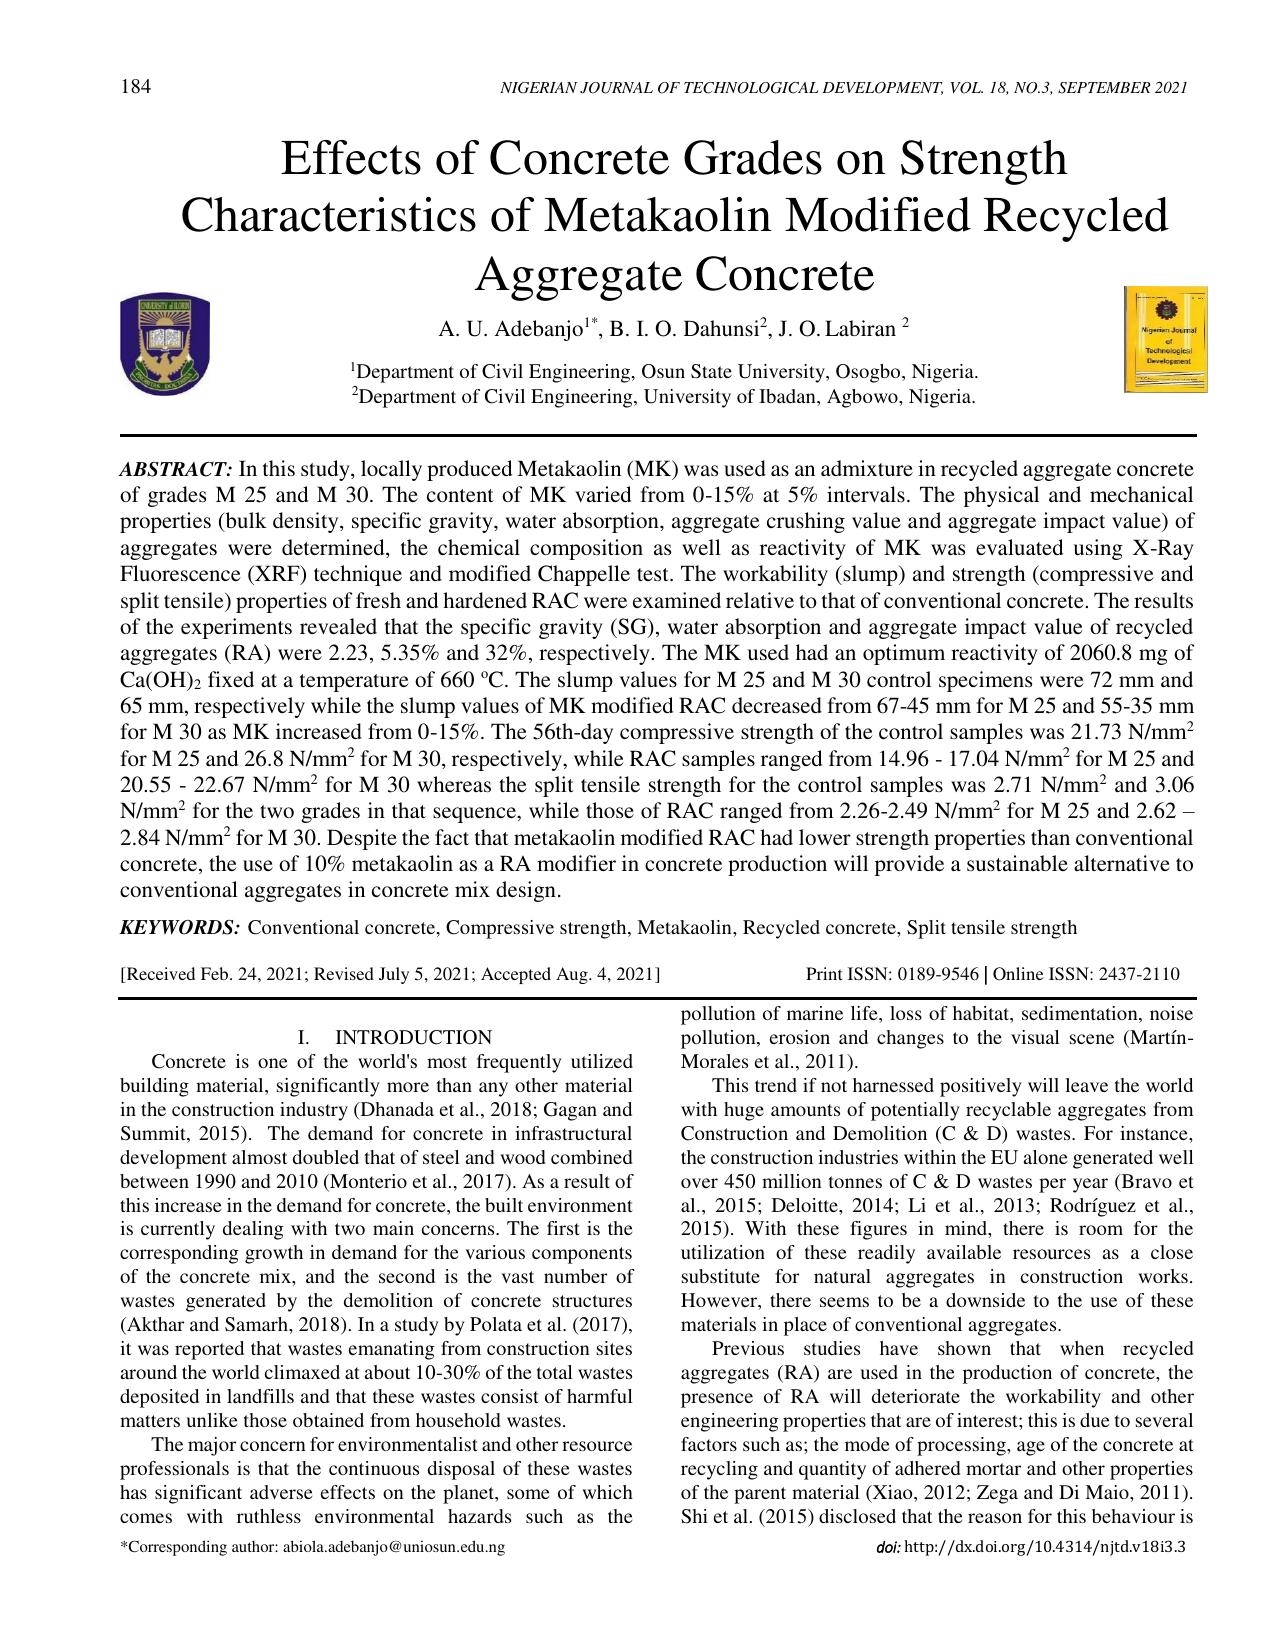 Effects of Concrete Grades on Strength Characteristics of Metakaolin Modified Recycled Aggregate Concrete  2021